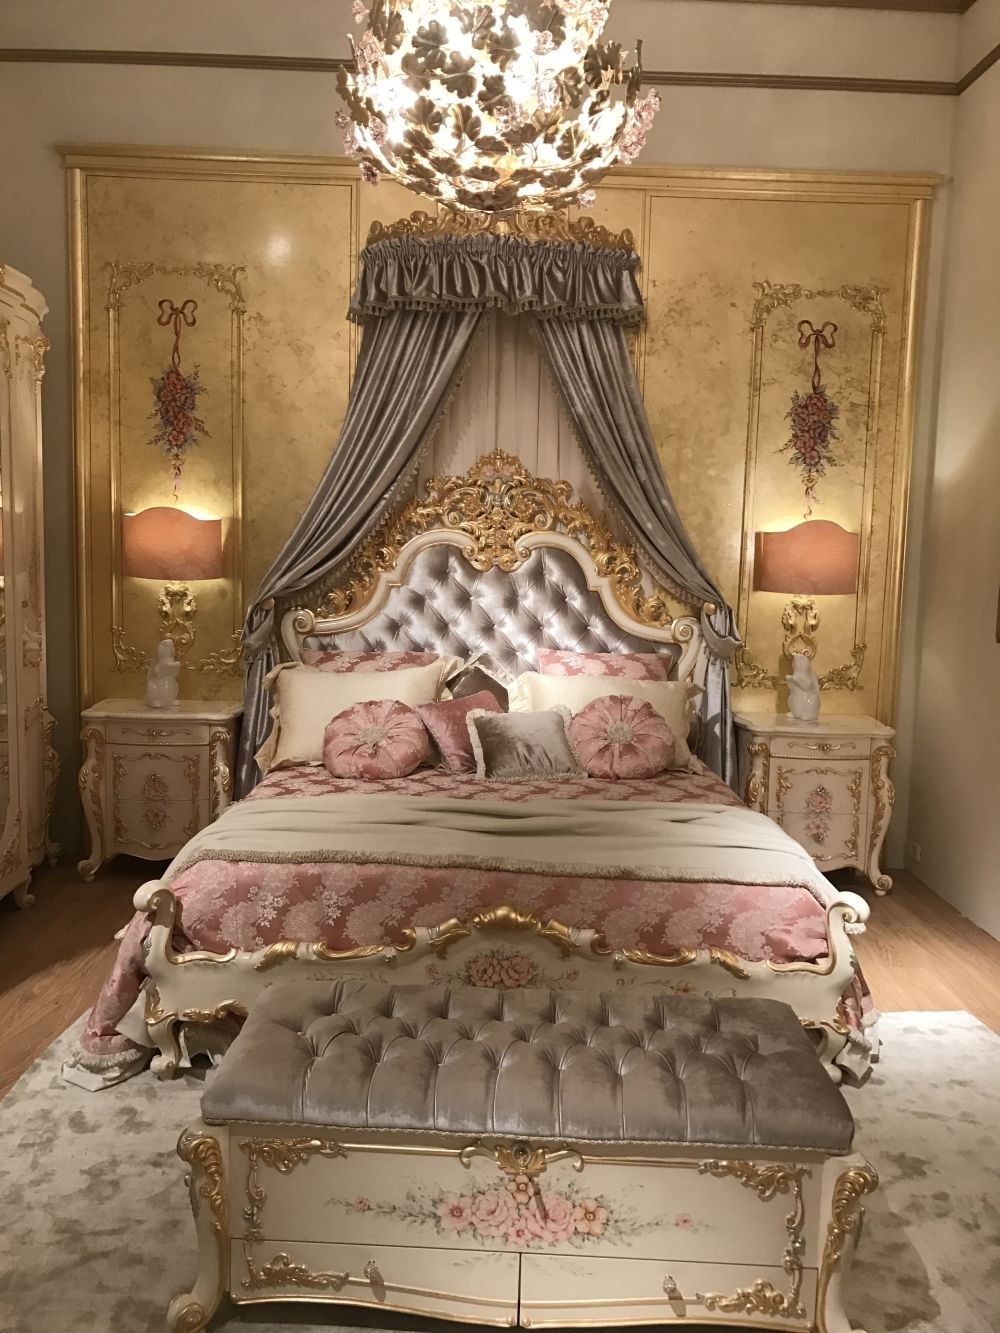 Baroque rococo style make for a luxury bedroom